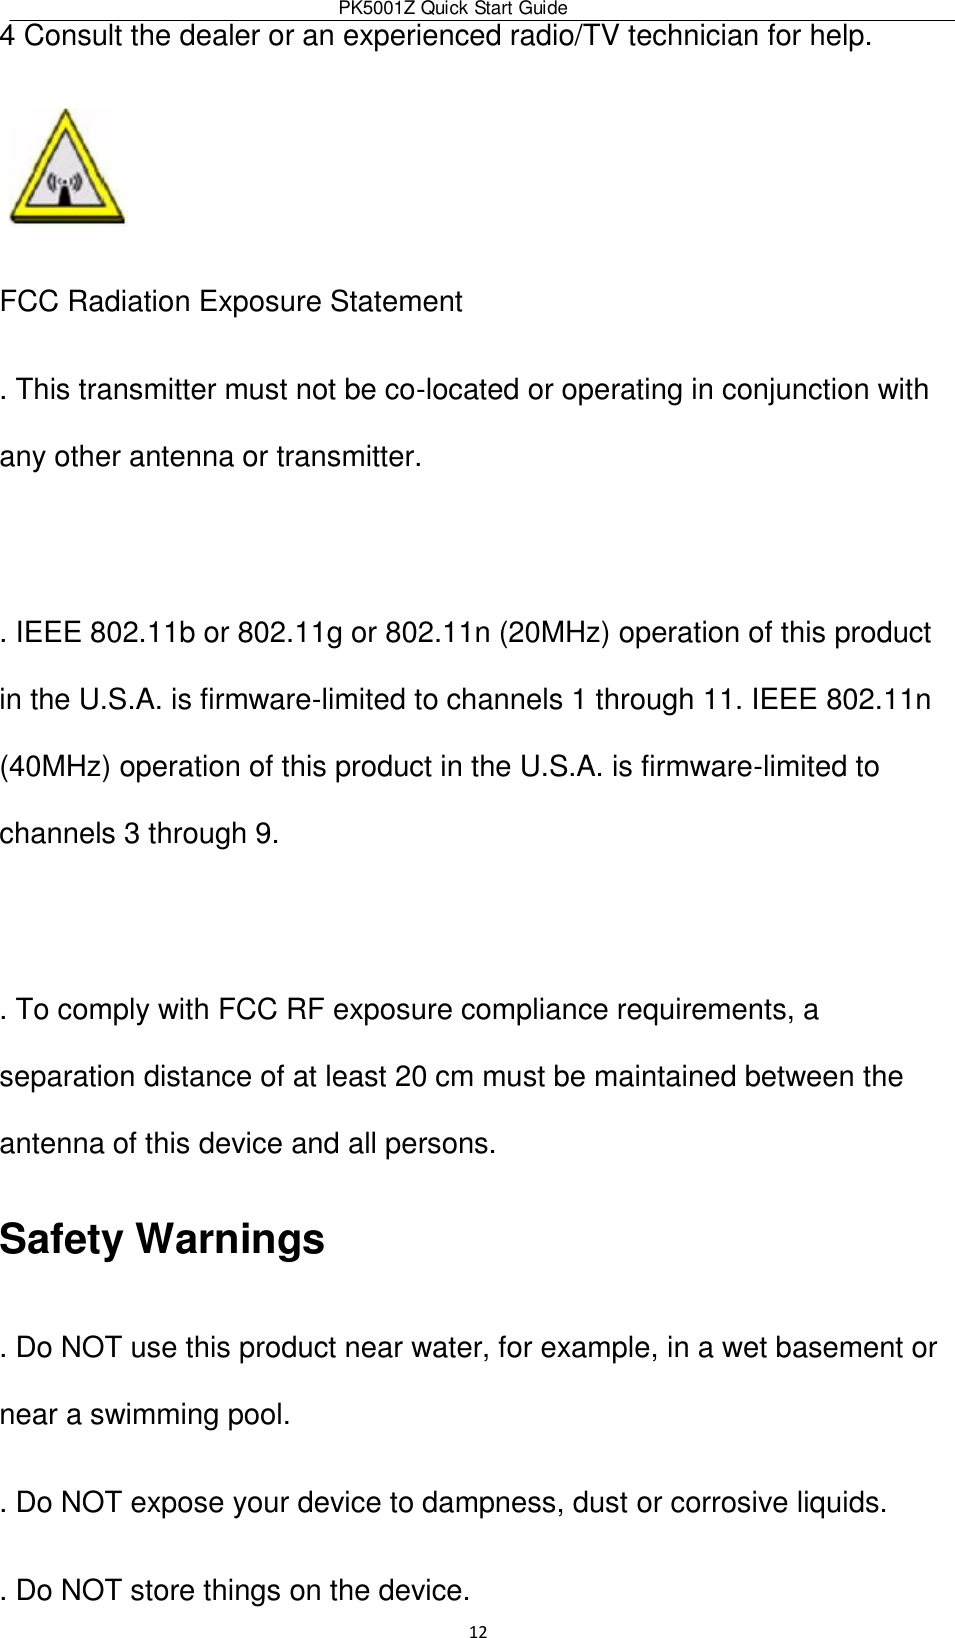 PK5001Z Quick Start Guide  12  4 Consult the dealer or an experienced radio/TV technician for help.  FCC Radiation Exposure Statement  . This transmitter must not be co-located or operating in conjunction with any other antenna or transmitter.   . IEEE 802.11b or 802.11g or 802.11n (20MHz) operation of this product in the U.S.A. is firmware-limited to channels 1 through 11. IEEE 802.11n (40MHz) operation of this product in the U.S.A. is firmware-limited to channels 3 through 9.   . To comply with FCC RF exposure compliance requirements, a separation distance of at least 20 cm must be maintained between the antenna of this device and all persons. Safety Warnings  . Do NOT use this product near water, for example, in a wet basement or near a swimming pool.  . Do NOT expose your device to dampness, dust or corrosive liquids.  . Do NOT store things on the device.  